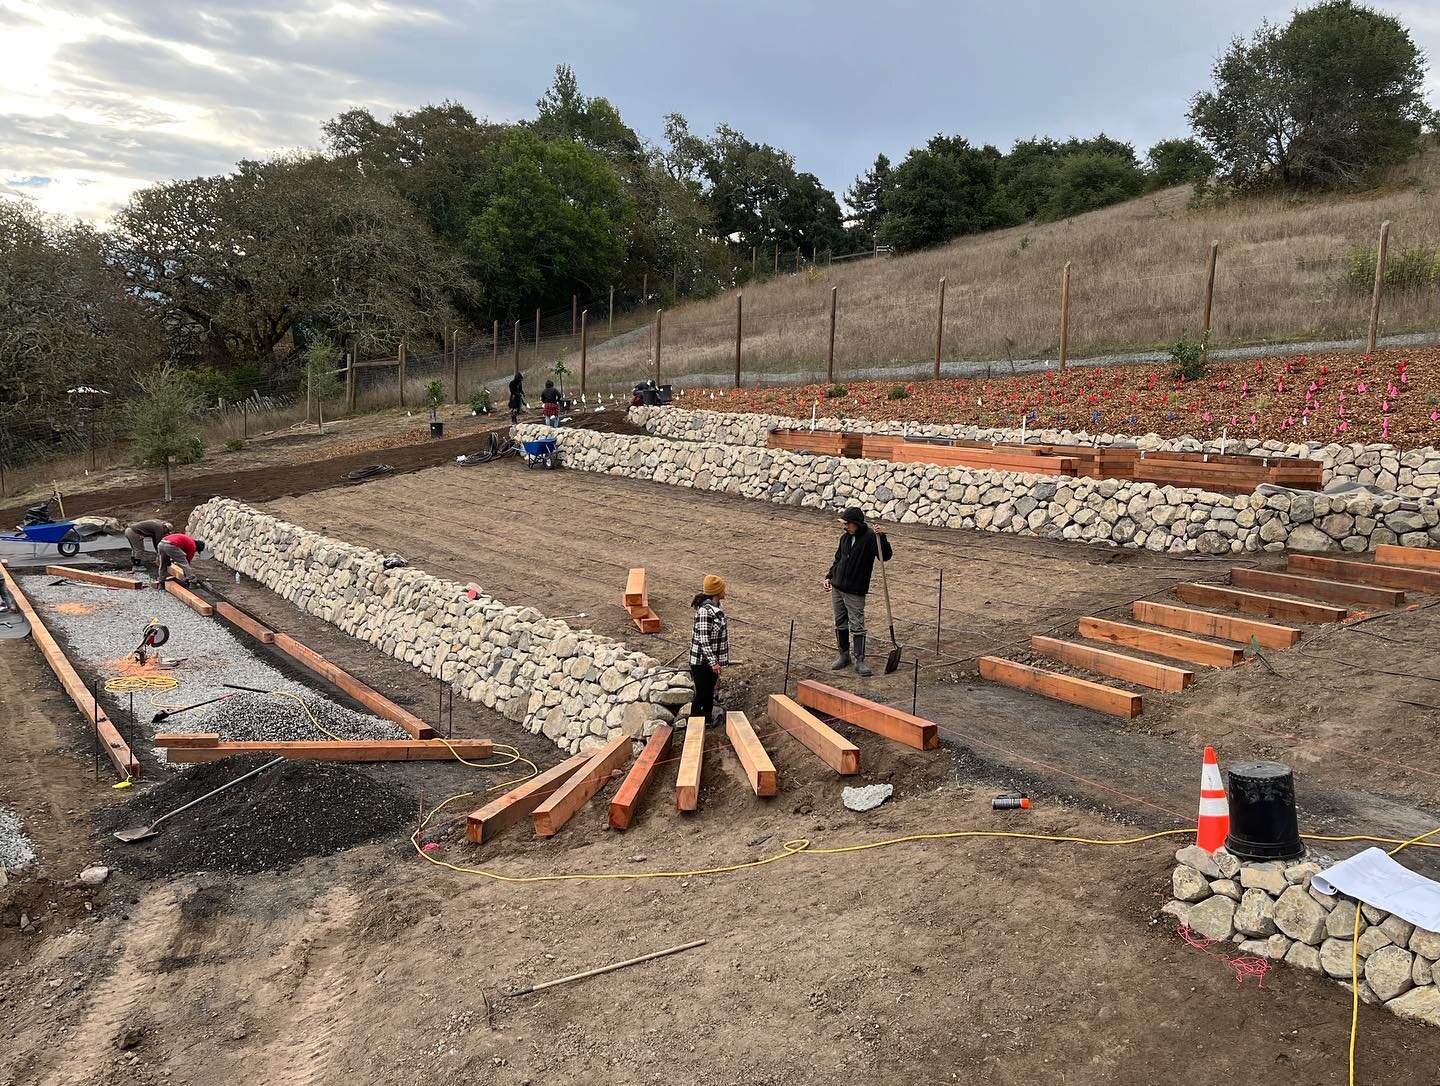 We have been hard at work on a project in Santa Rosa constructing drystack walls, installing timber steps and raised beds, and planting native meadows around a lovely hillside home that has an equally beautiful view... A huge shoutout to our construc